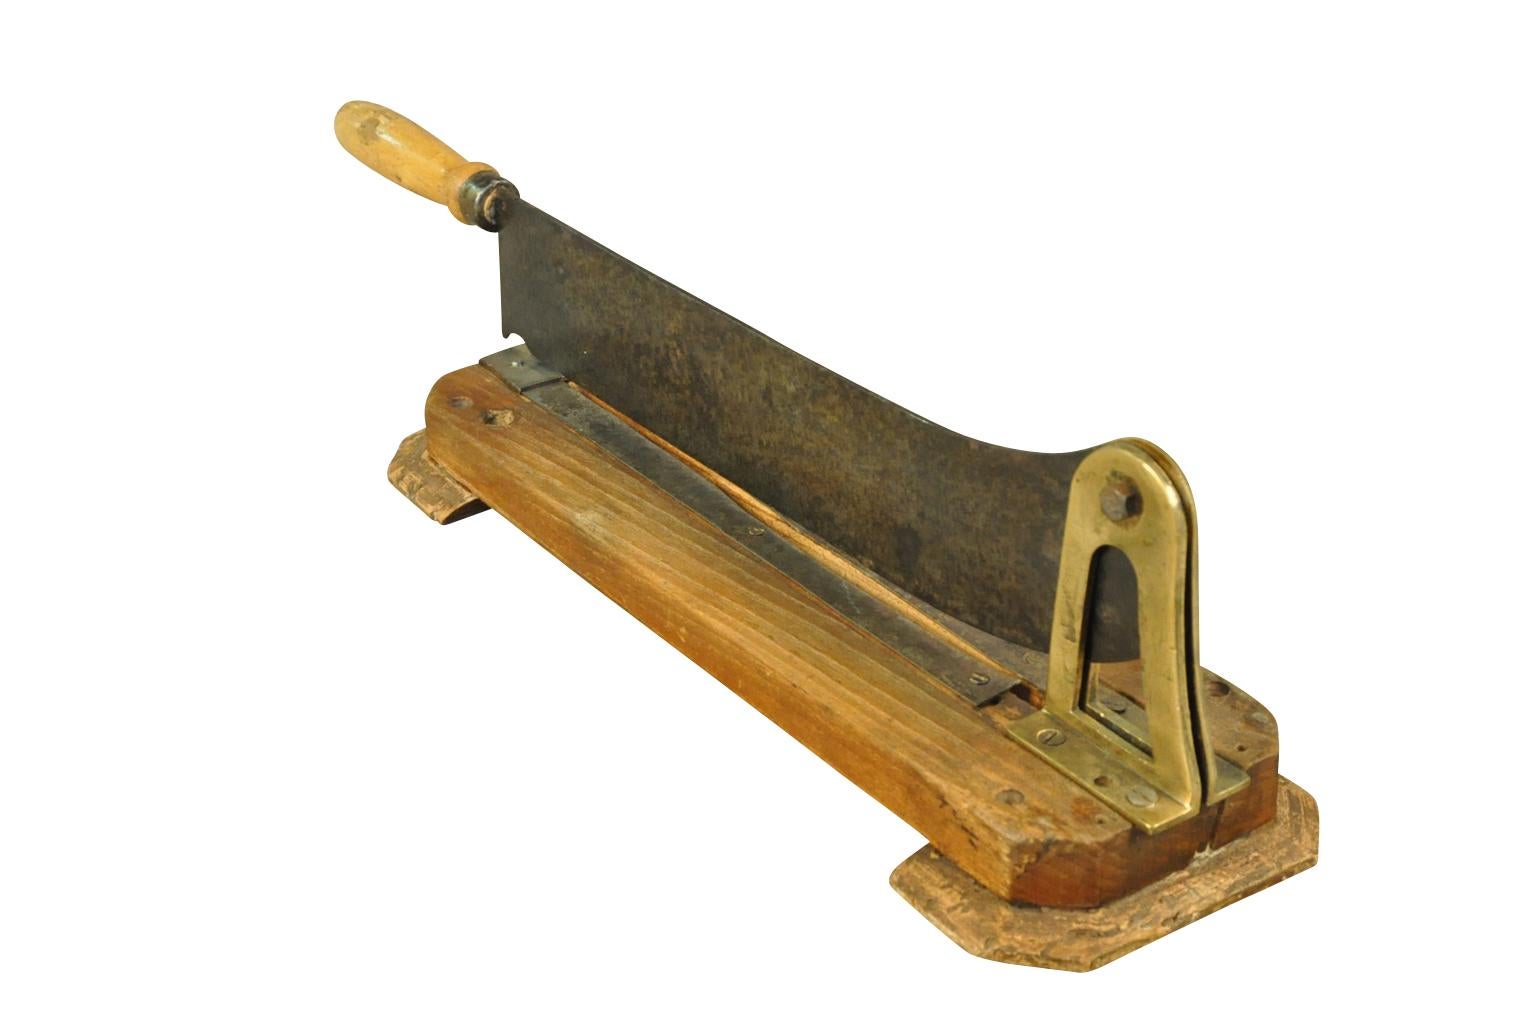 French 19th century Baguette cutter in wood and iron. A terrific kitchen accessory.